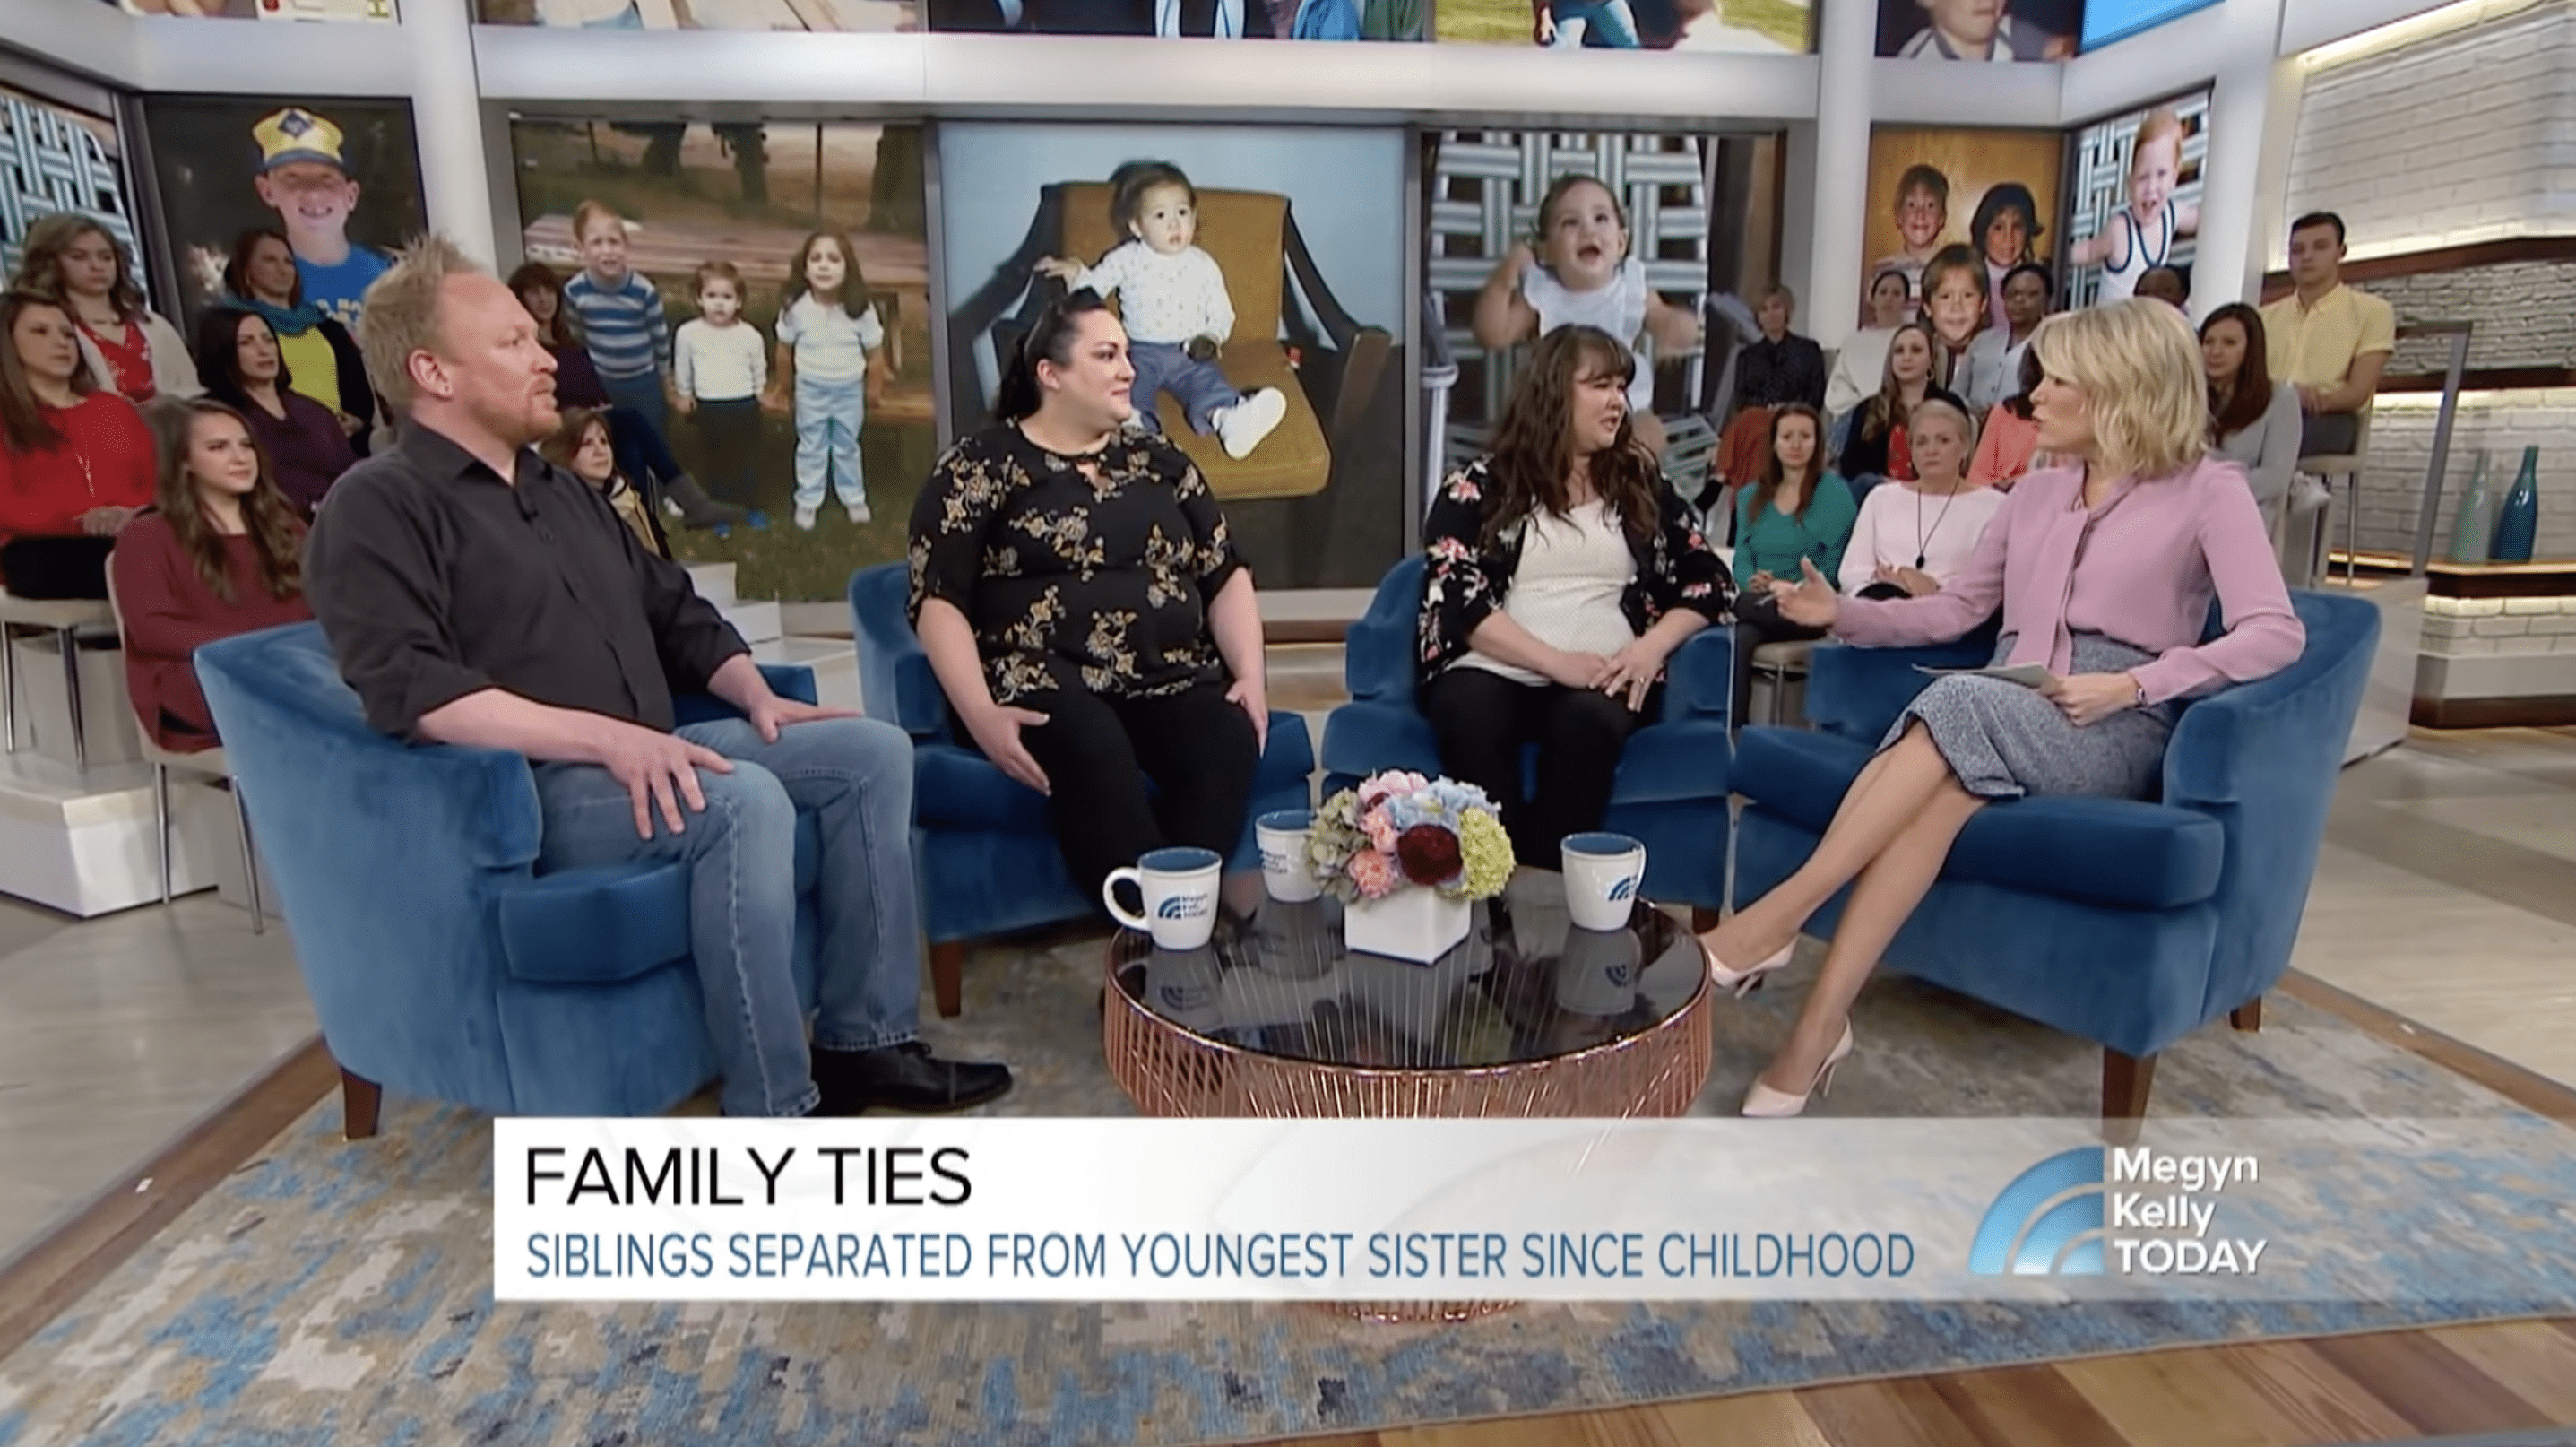 Brian, Christine, and Laurie appeared on Megyn Kelly TODAY to discuss details of their adoption and long-lost sister. | Photo: YouTube.com/TODAY